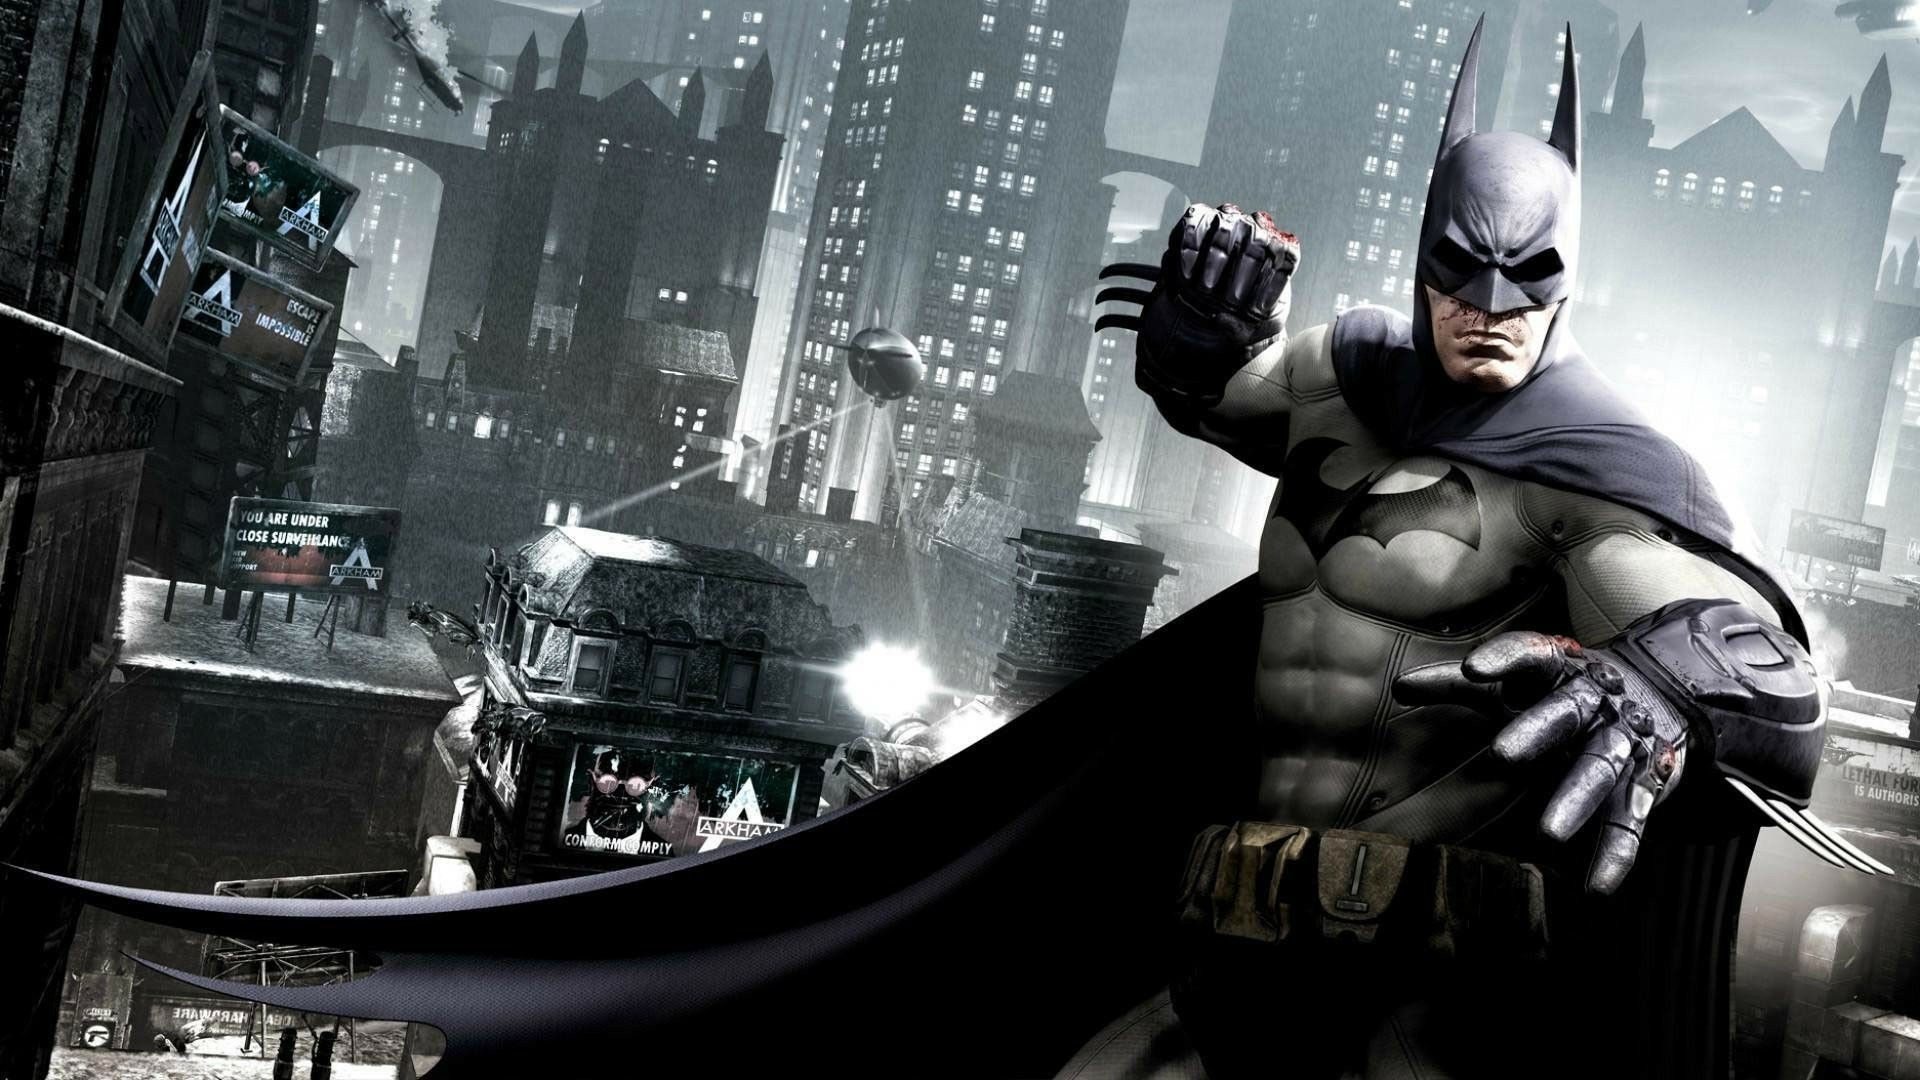 Batman: 10 Things From The Arkham Games We Want To See On The Page